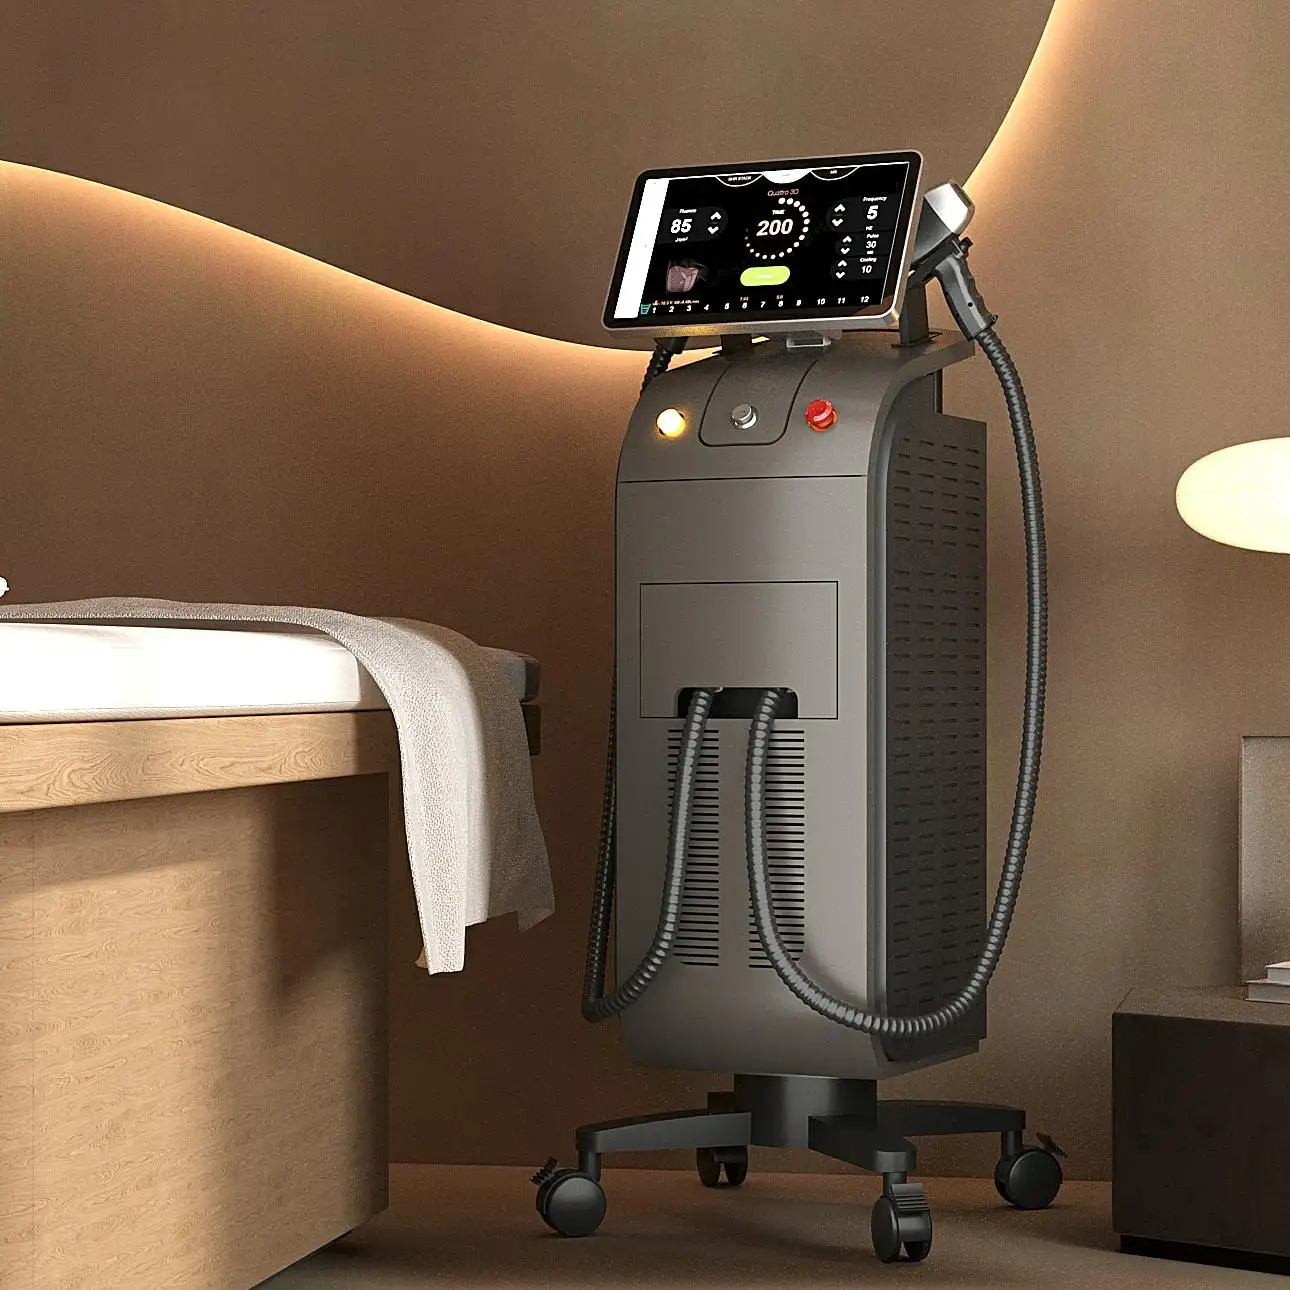 DFLASER Ice Titanium Alex 755 808 940 1064 Laser Hair Removal CE Approved Germany 600-2000w Diode Laser Stationary